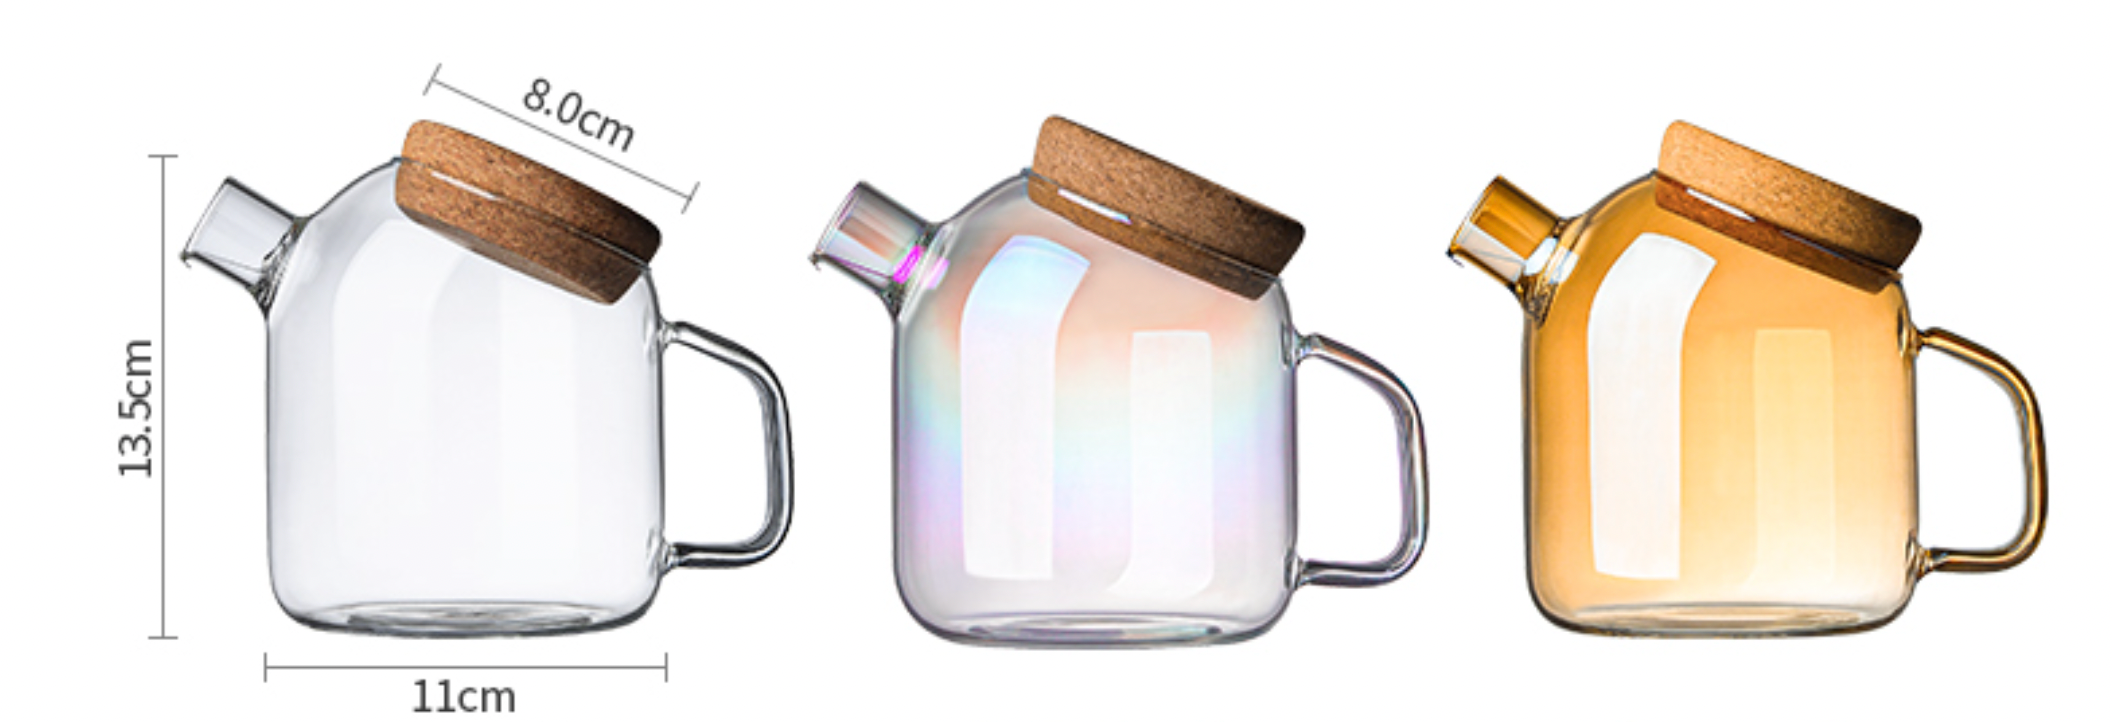 Iridescent Water Pitcher by PROSE Tabletop